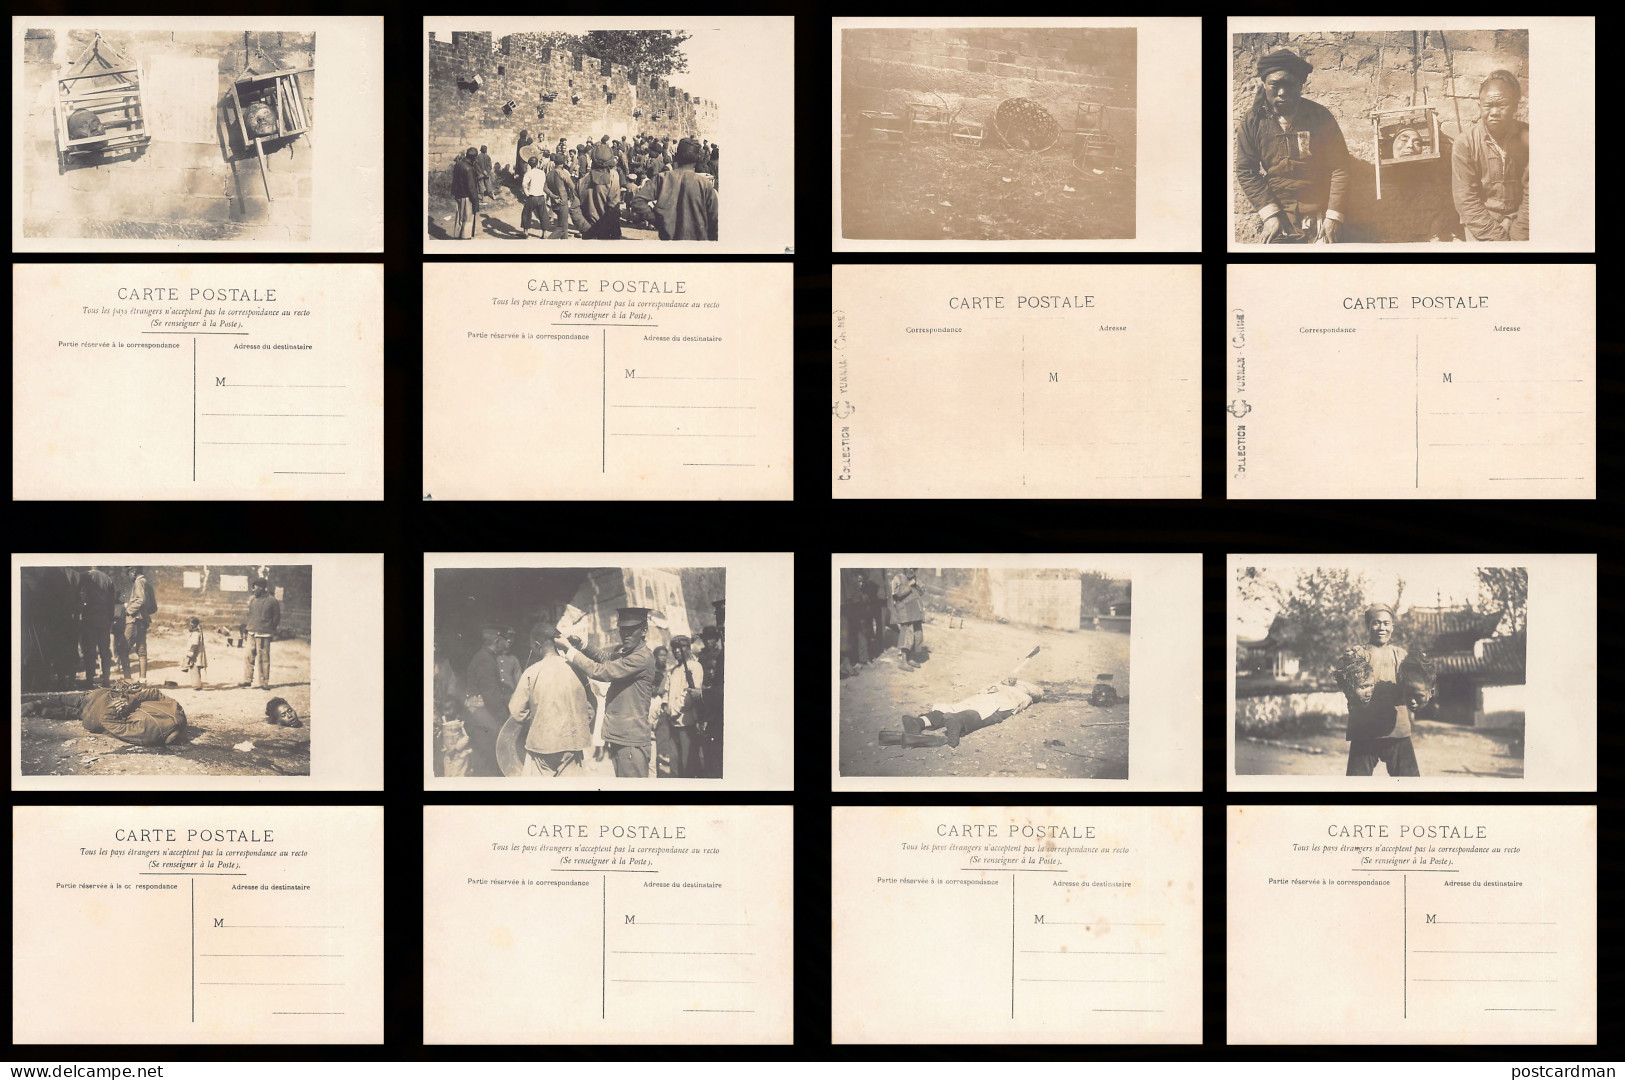 China - YUNNAN - Execution Off The Wall Of Mengzi City - Set Of 8 Real Photo Postcards - Publisher Unknown (Collection Y - China